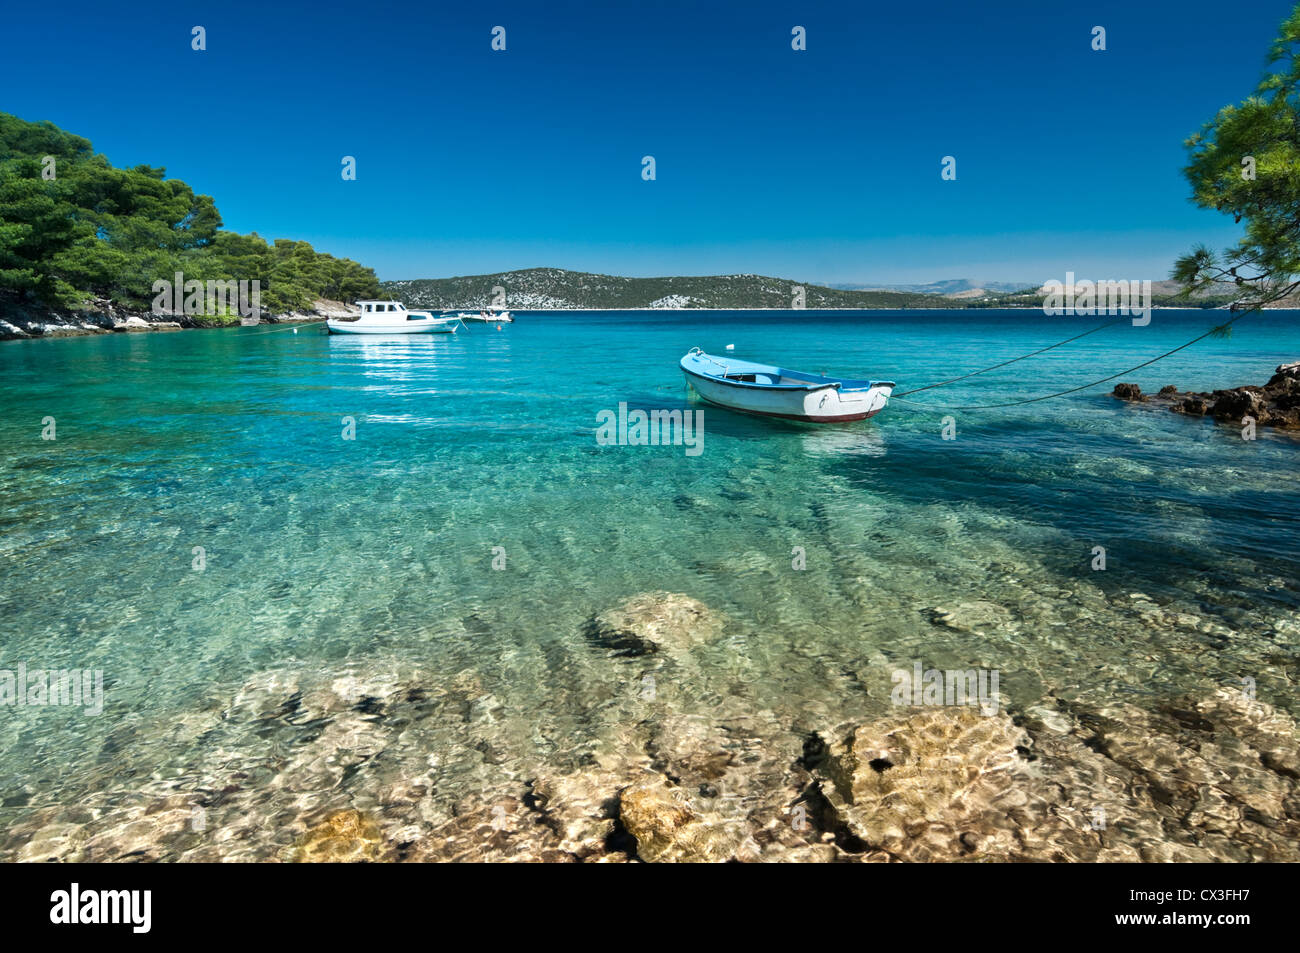 Transparent water with a boat and mountains in background. Bilo, Dalmatia, Croatia Stock Photo